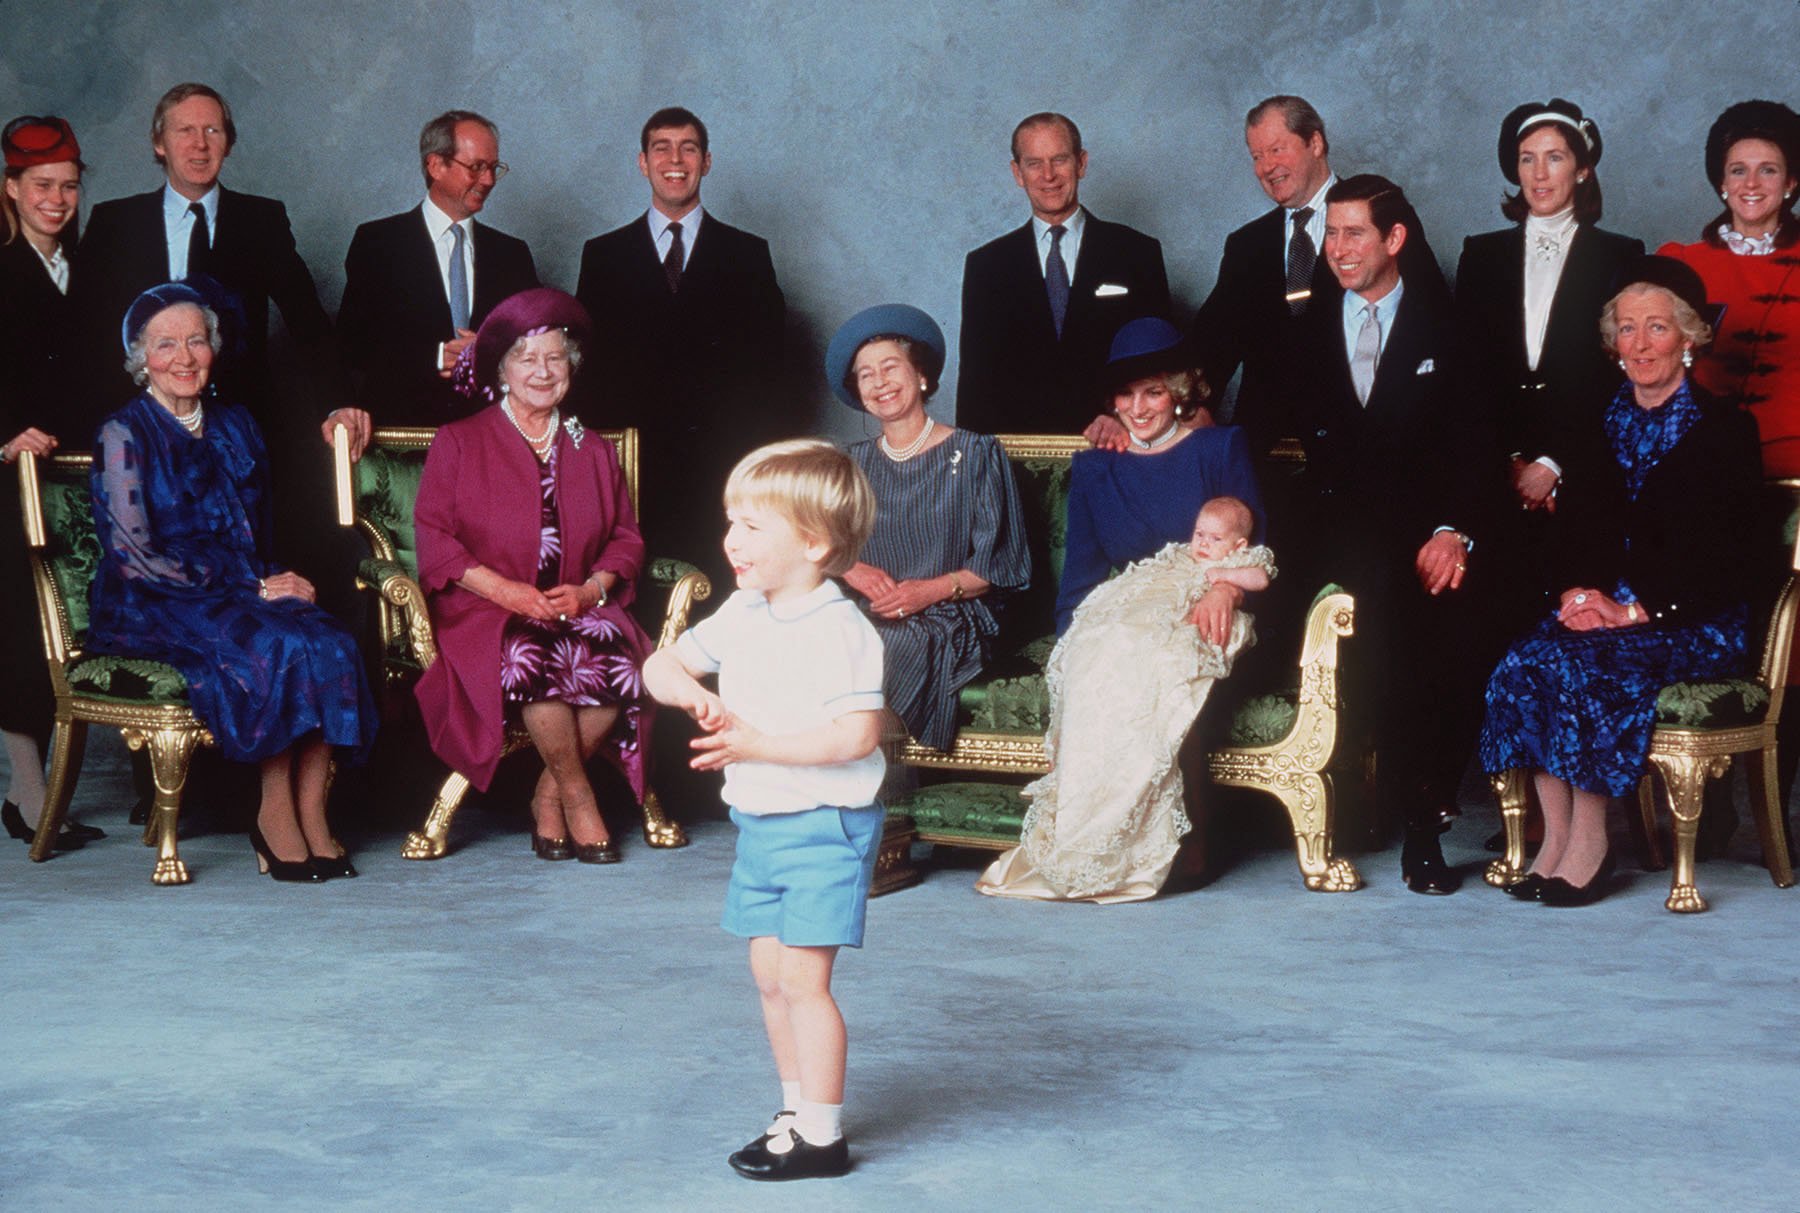 Royal parents and godparents who enjoy the antics of young Prince William, Prince Harry is christened at Windsor Castle on December 21, 1984 in Windsor, England |  Source: Getty Images